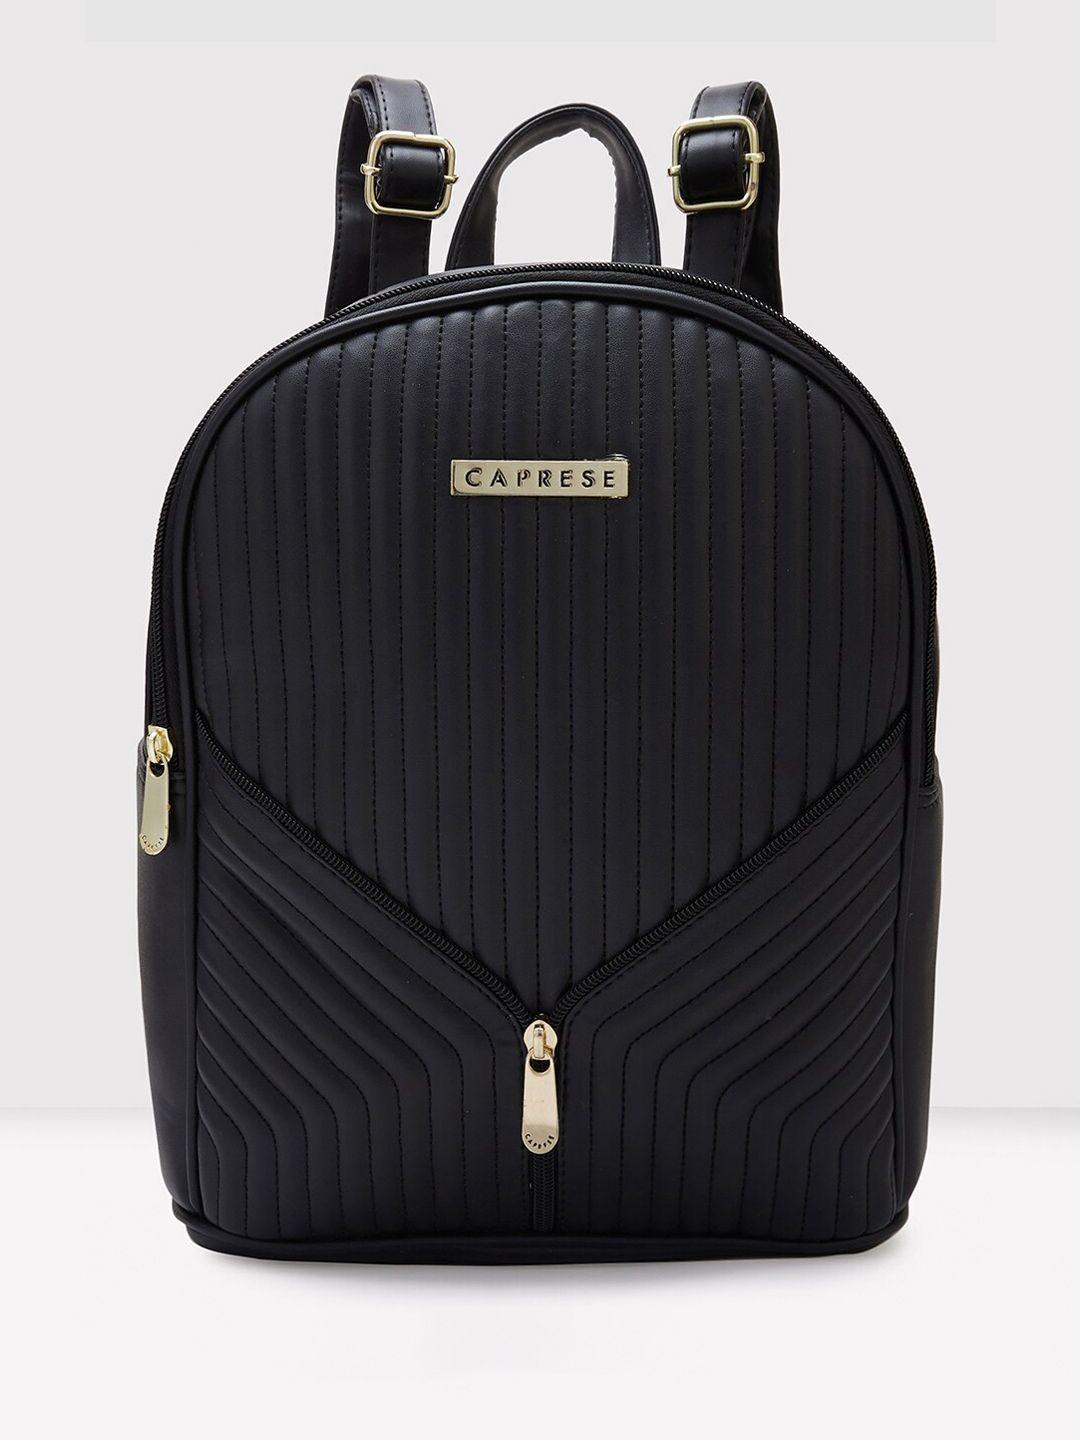 caprese textured leather backpack